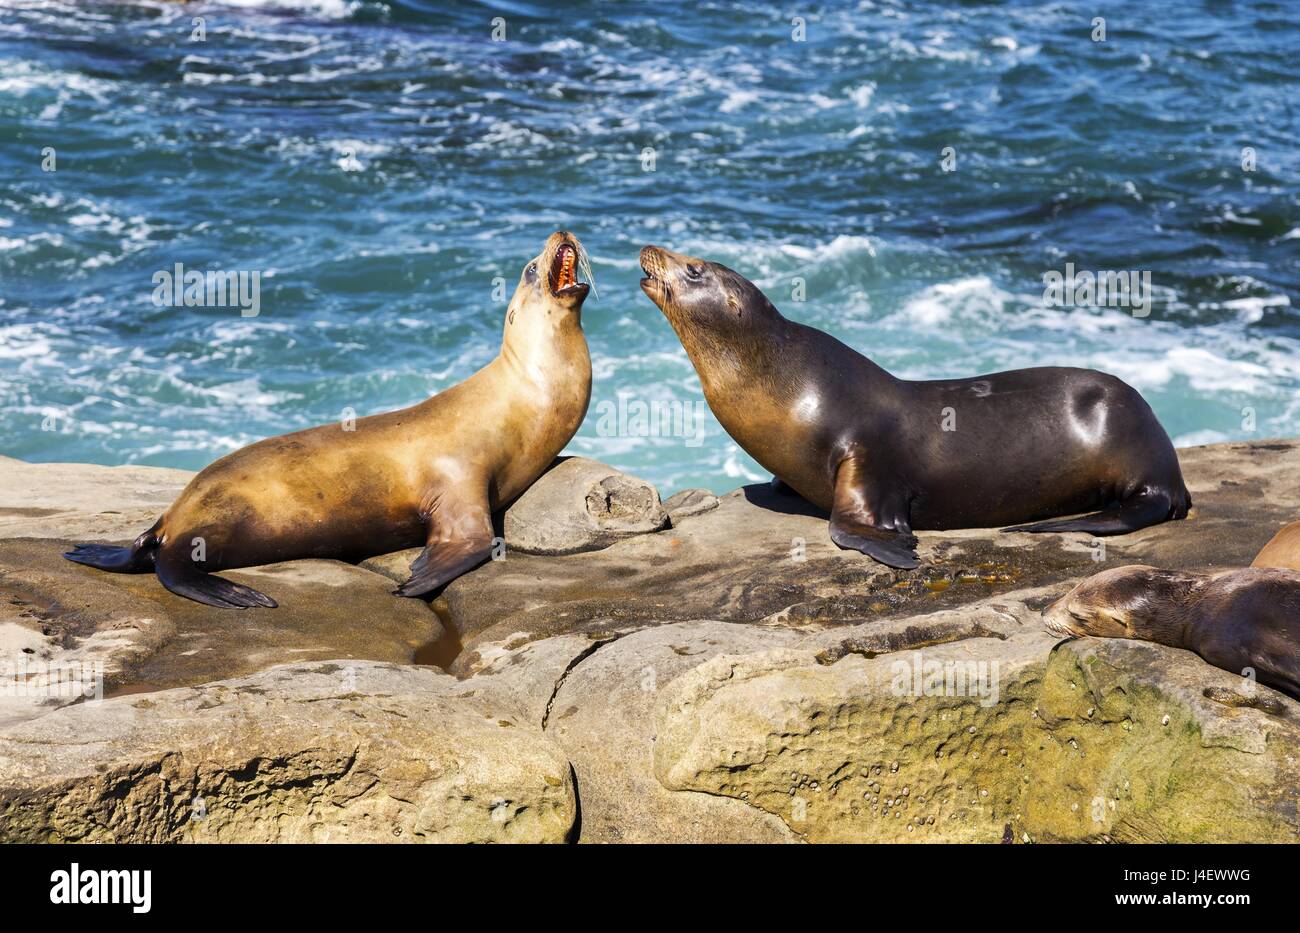 Male and Female Seals (Phoca Vitulina or Harbour Seal) Marine Mammals Mating Play on Rock near La Jolla Cove north of San Diego, California Stock Photo